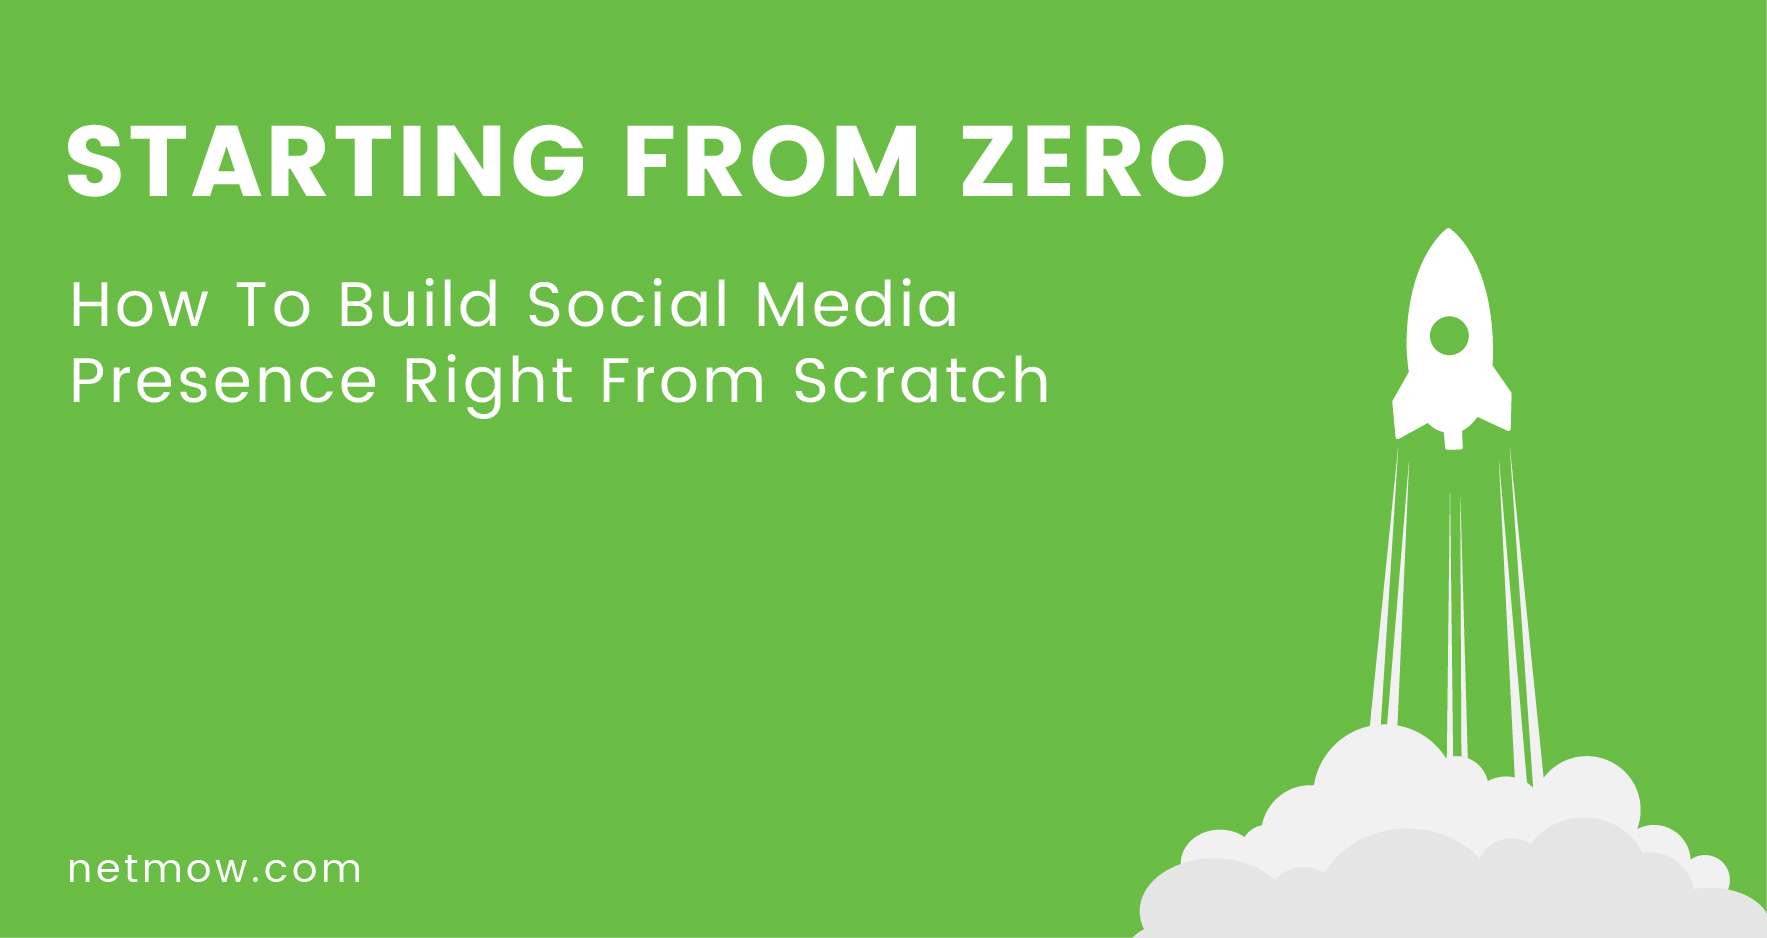 Starting From Zero: How To Build Social Media Presence Right From Scratch